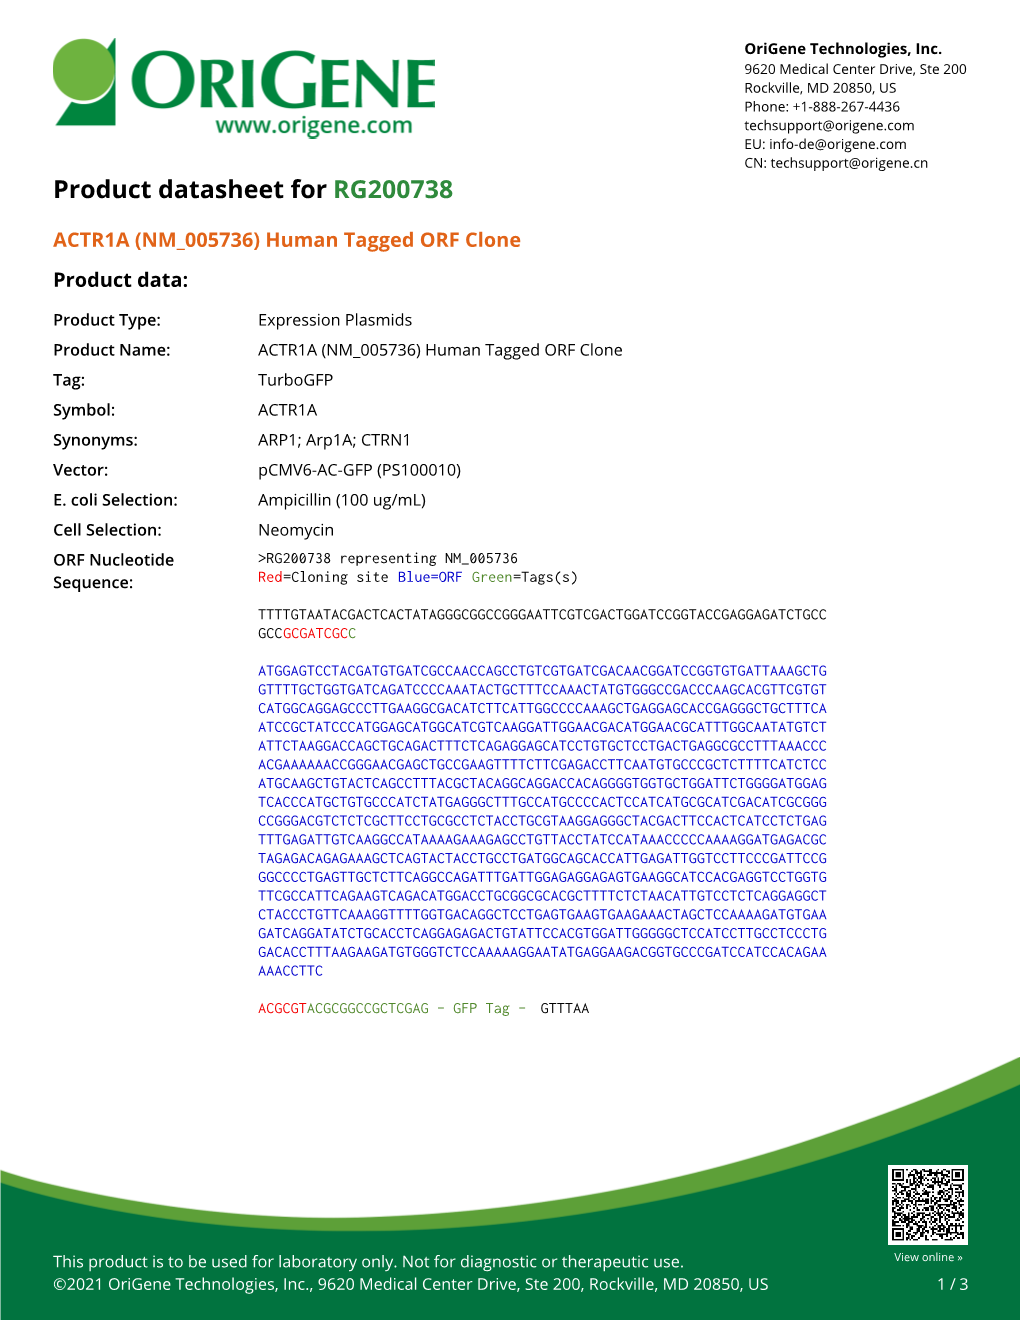 ACTR1A (NM 005736) Human Tagged ORF Clone Product Data